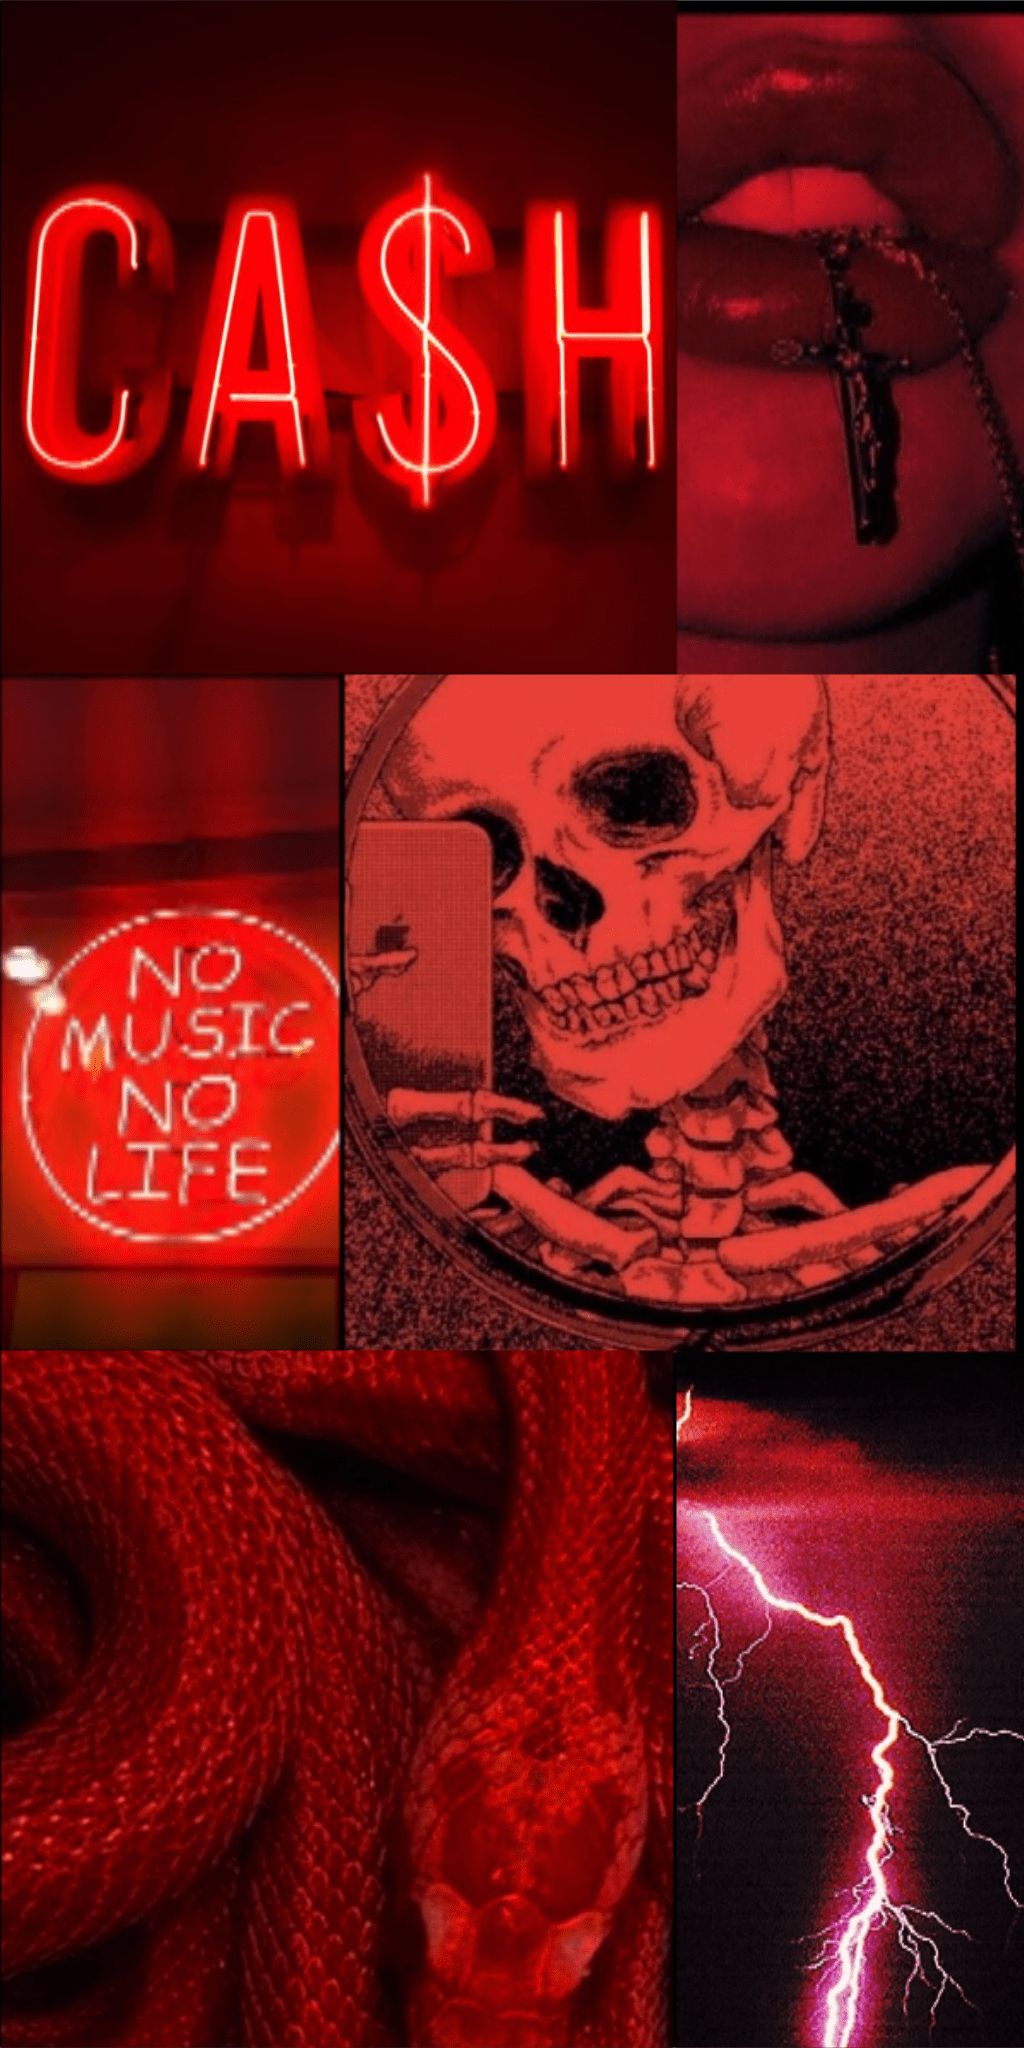 Red aesthetic background with cash, lightning, snake, and skeleton. - Red, neon red, dark red, iPhone red